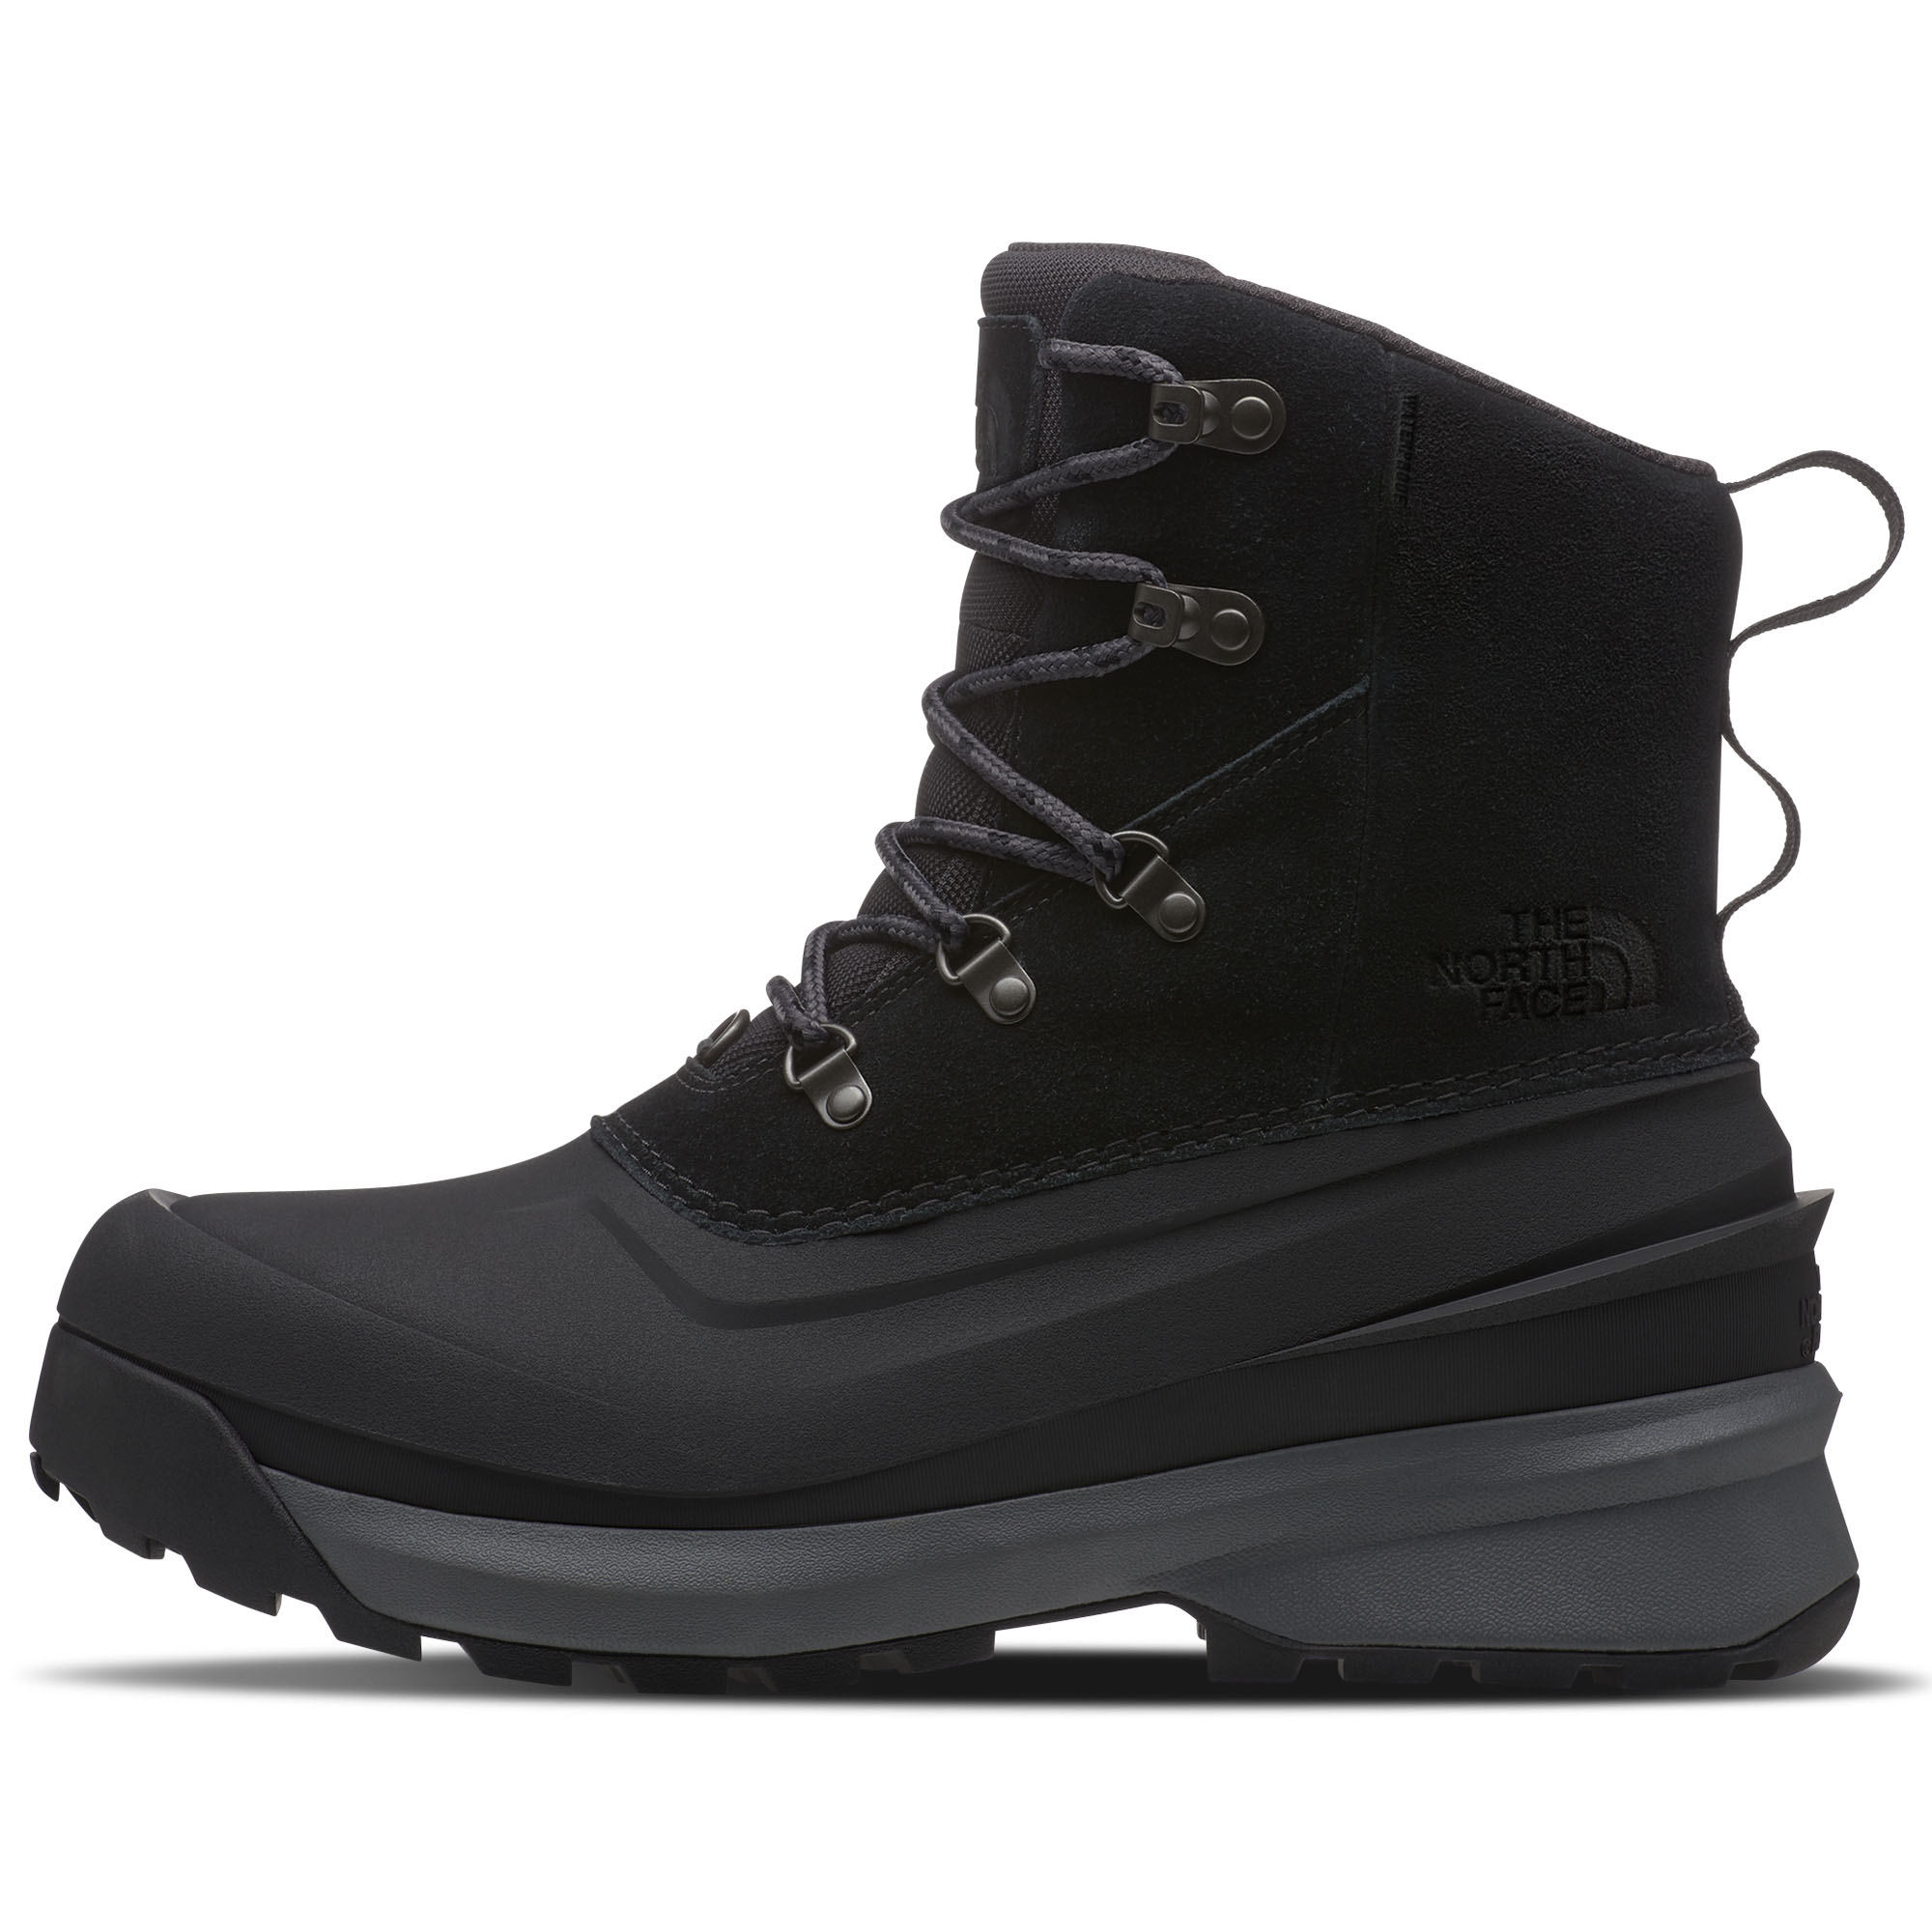 The North Face Men's Chilkat V Lace Waterproof Boots -  00196009573673